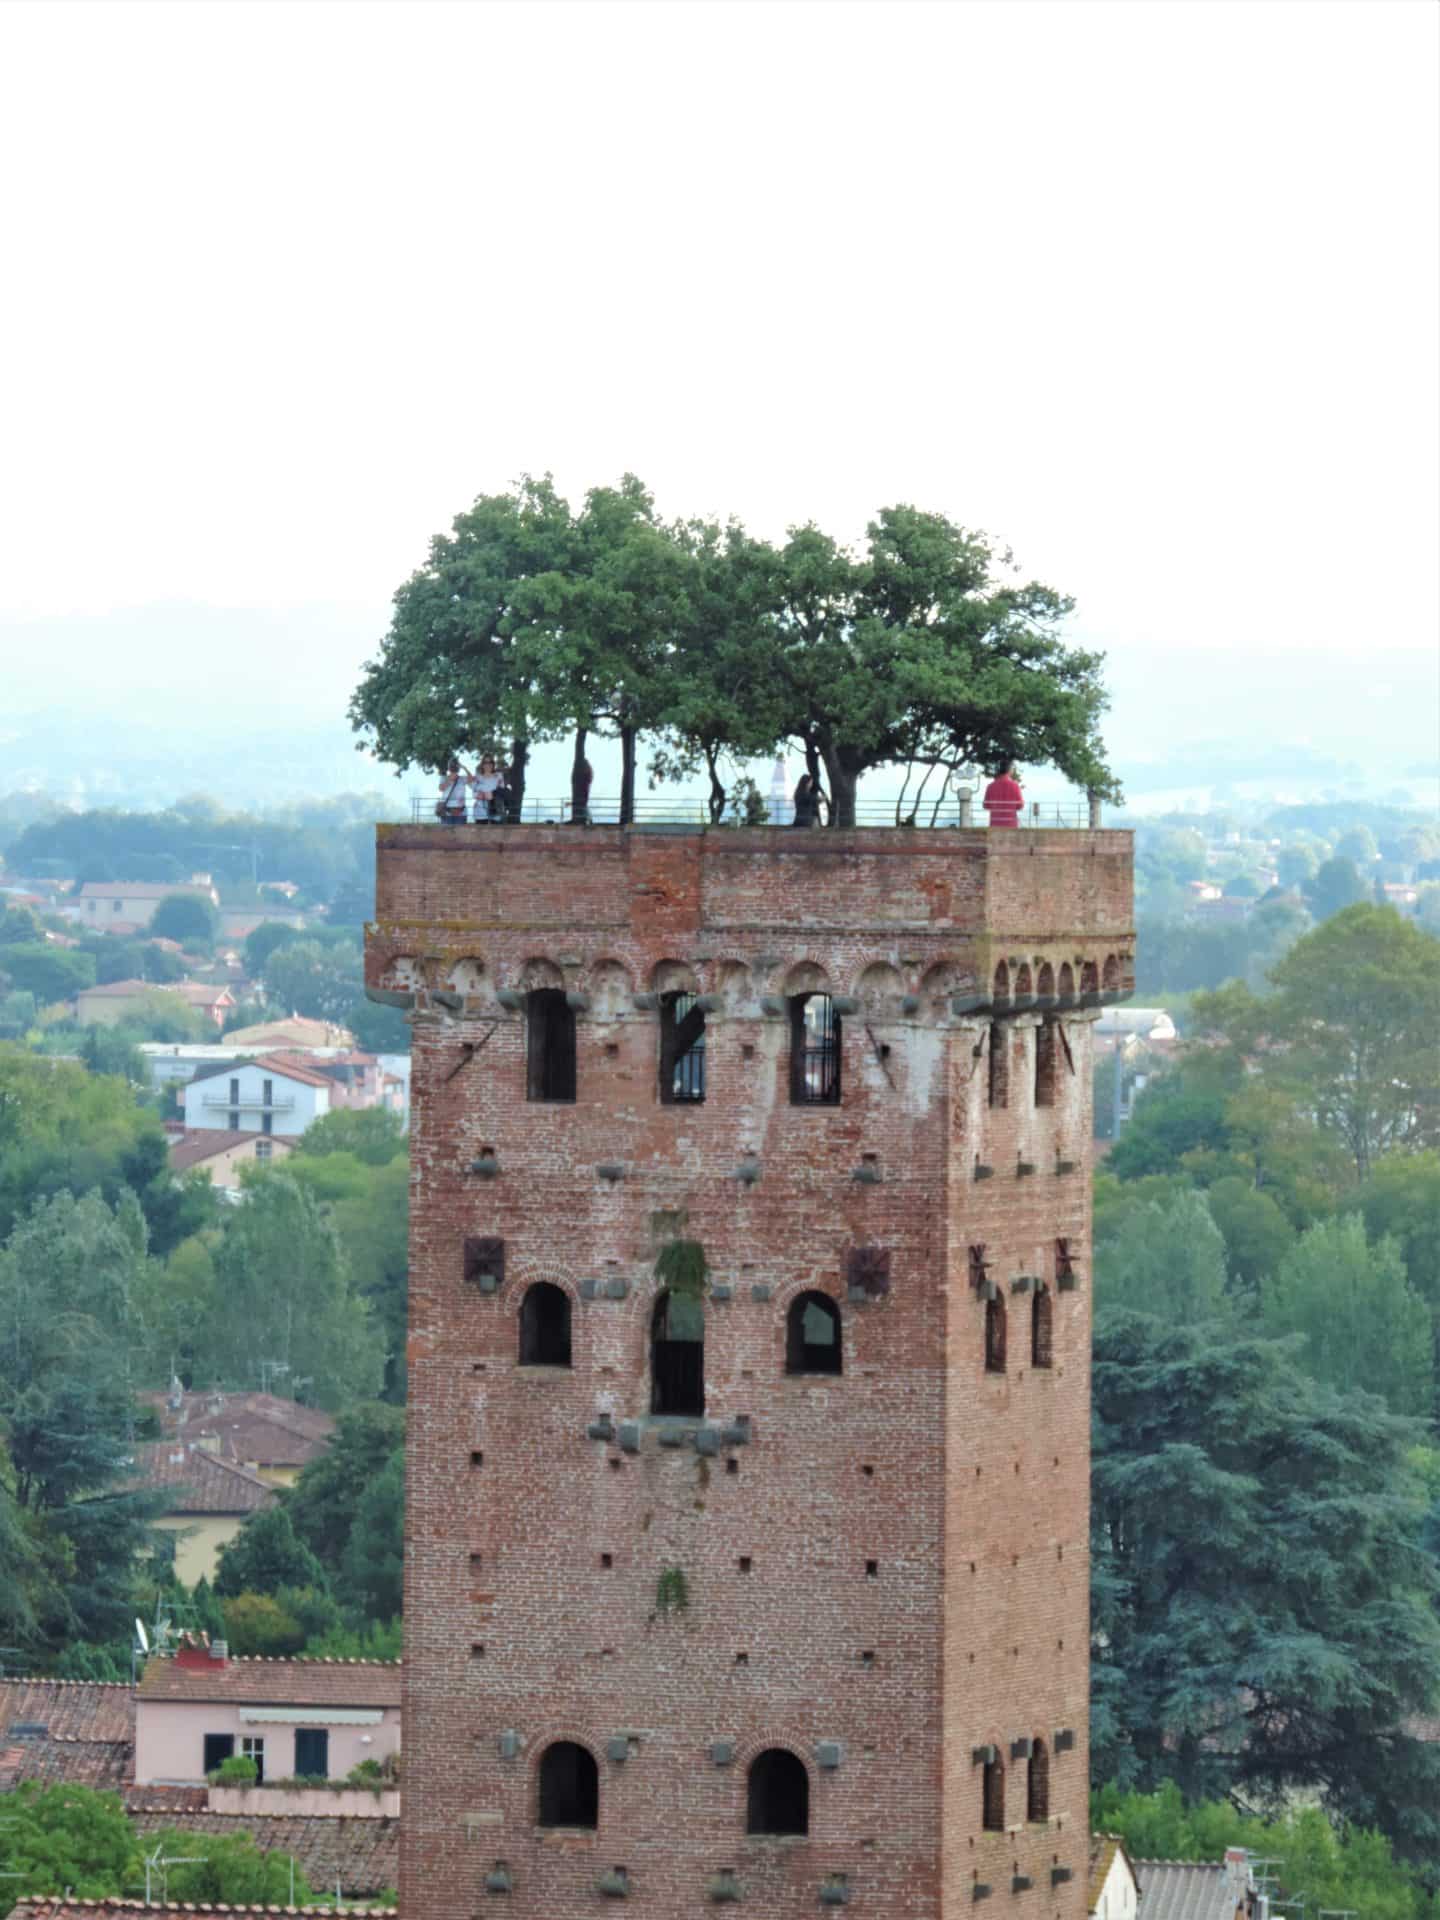  Guigini Tower with sproying trees